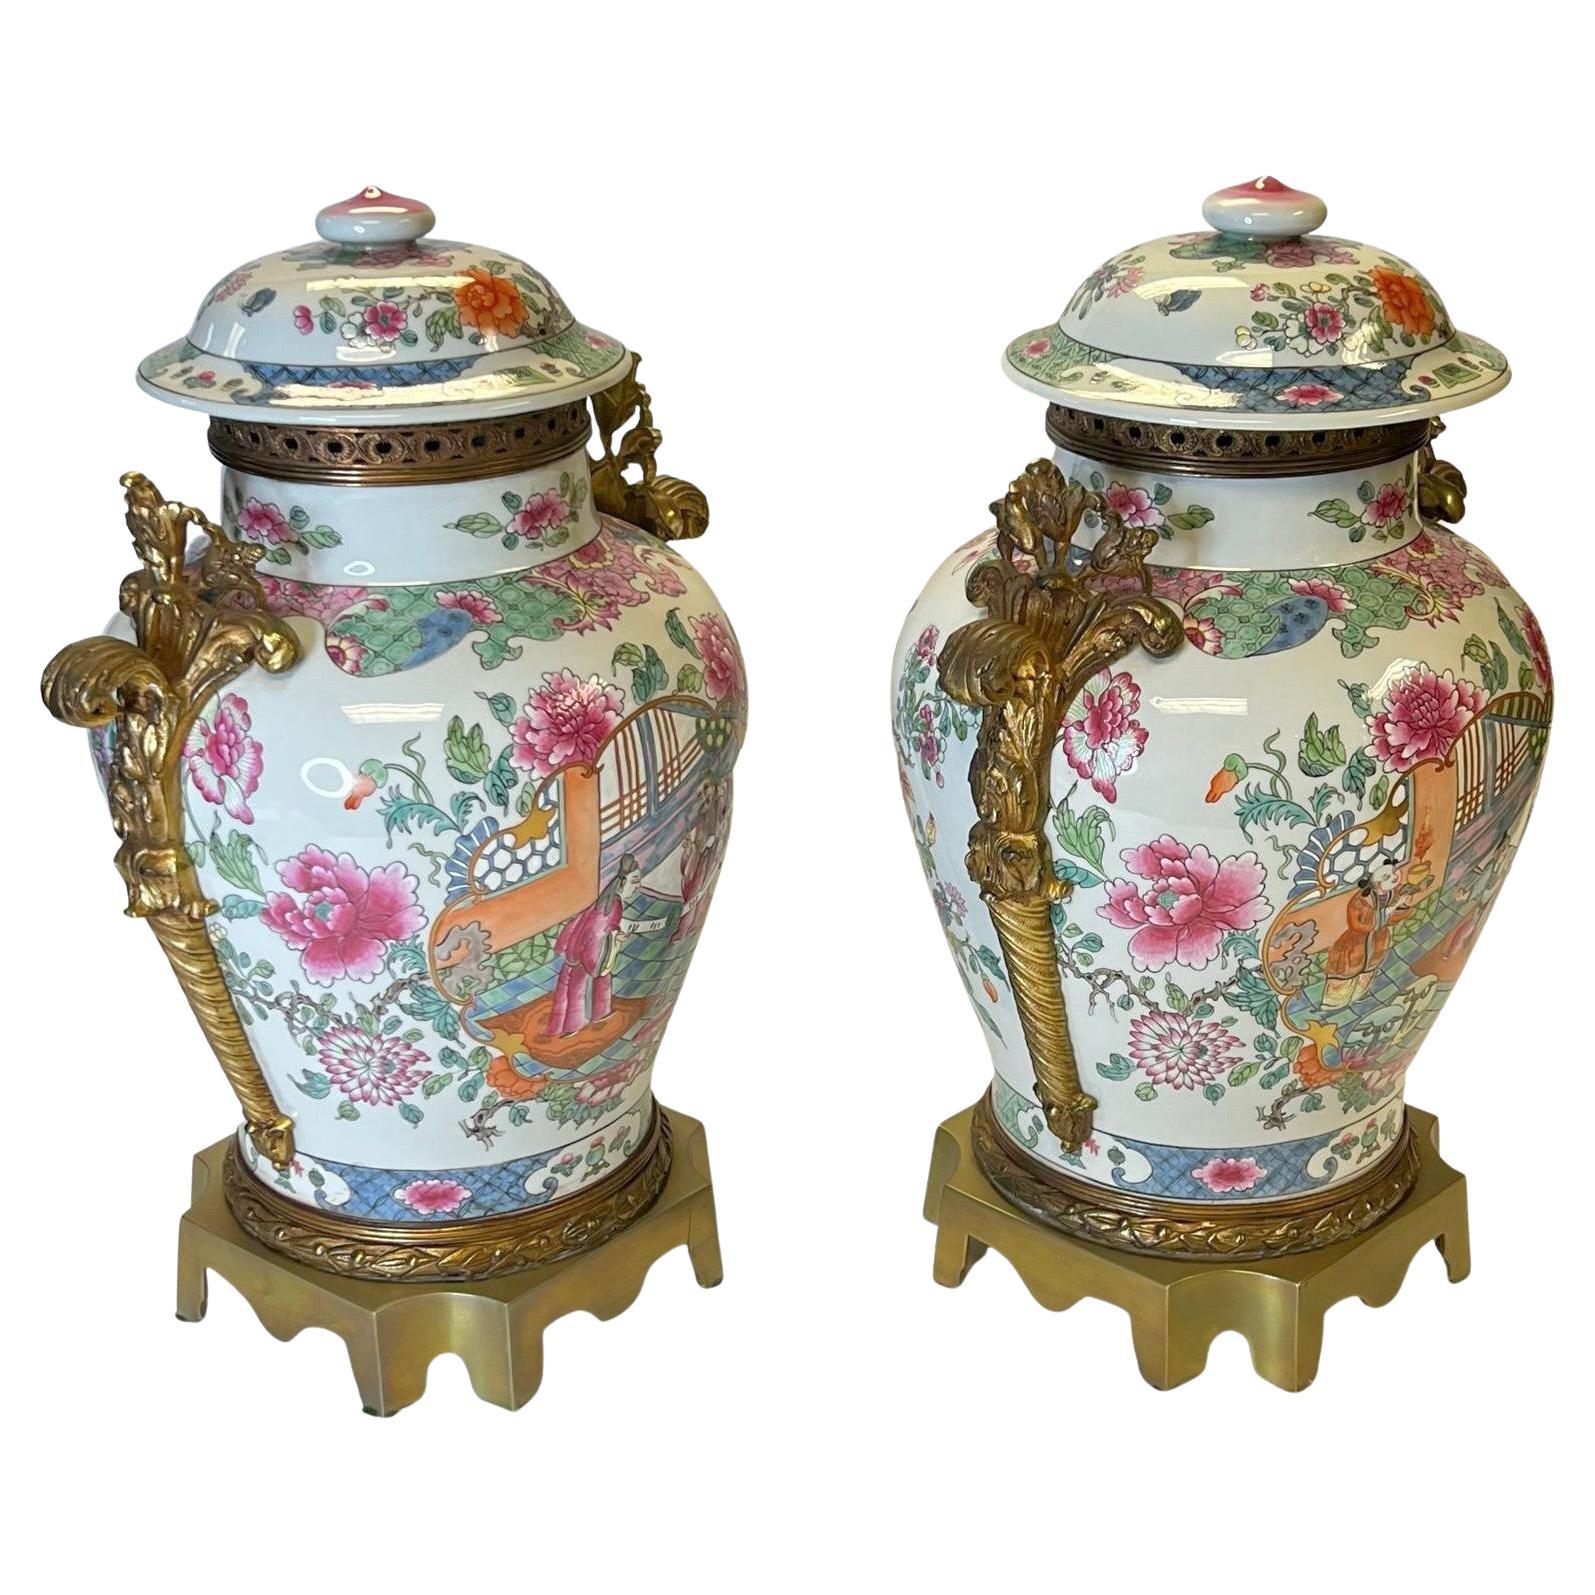 Pair Famille Rose Chinese Ginger Jars with Bronze Mounts in Louis XVI Style.